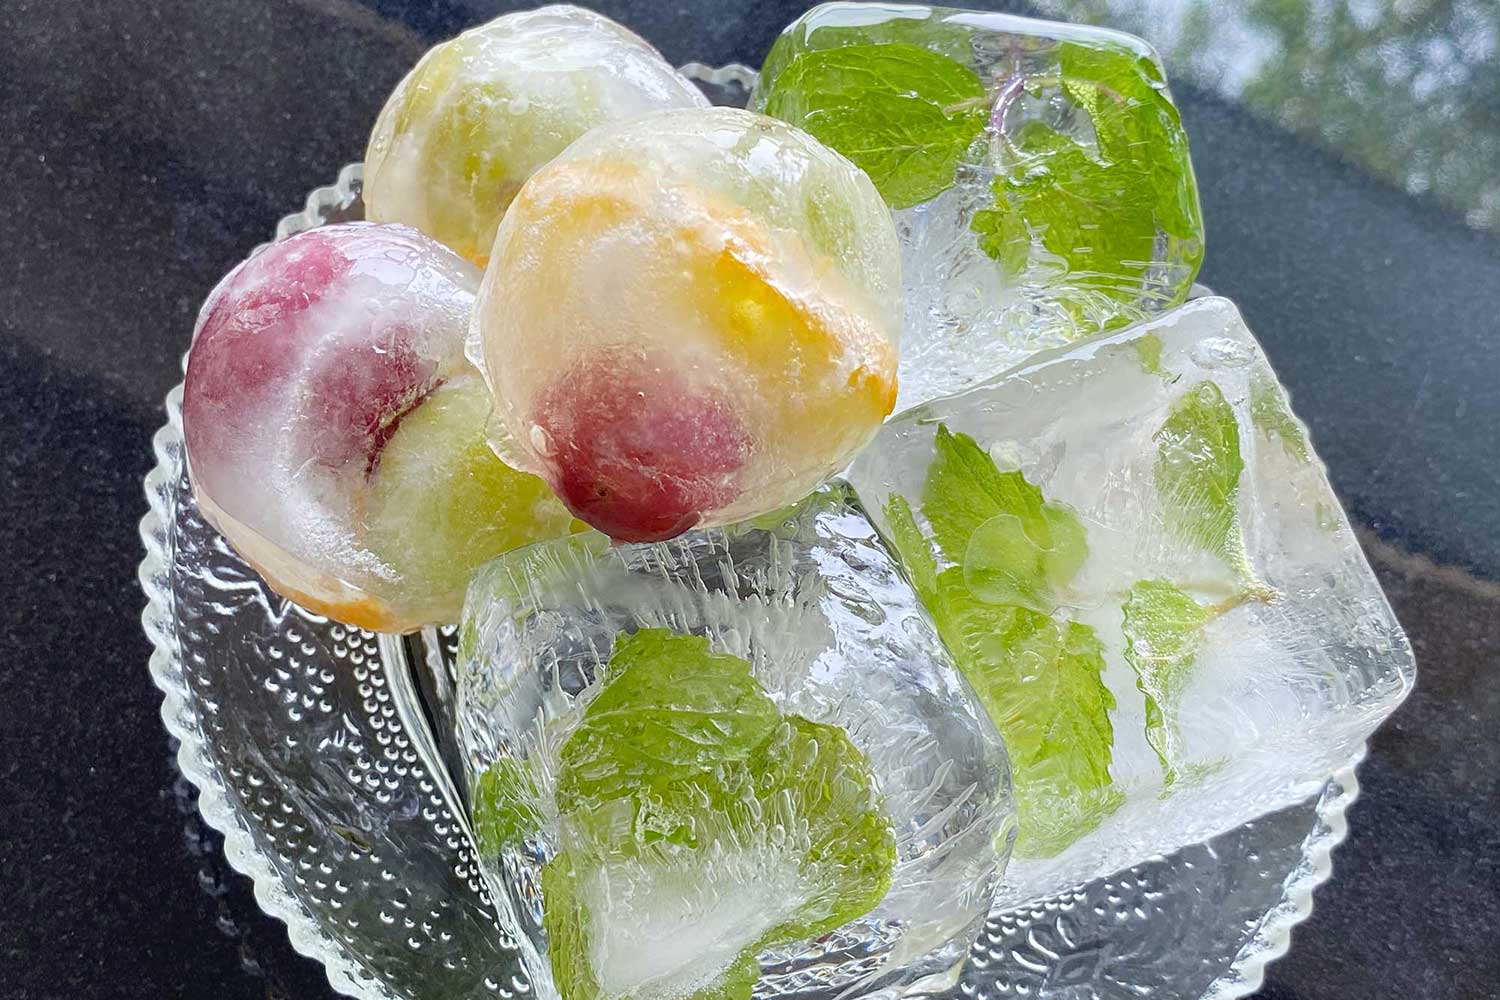 Collaboration of ice, fruitand mint.